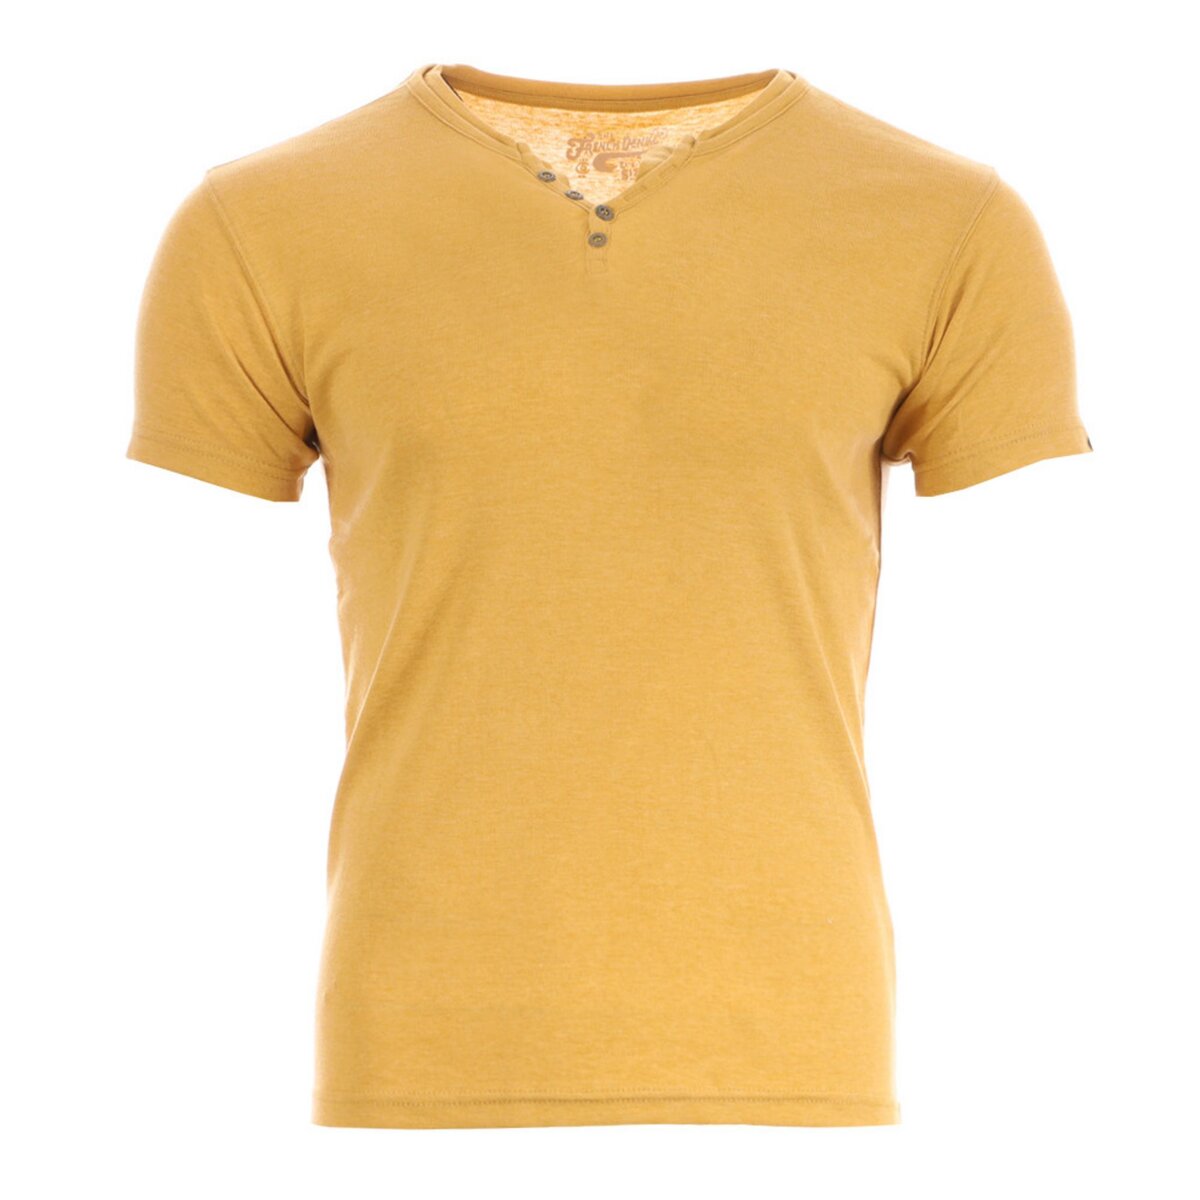 RMS 26 T-shirt Jaune Homme RMS26 90947